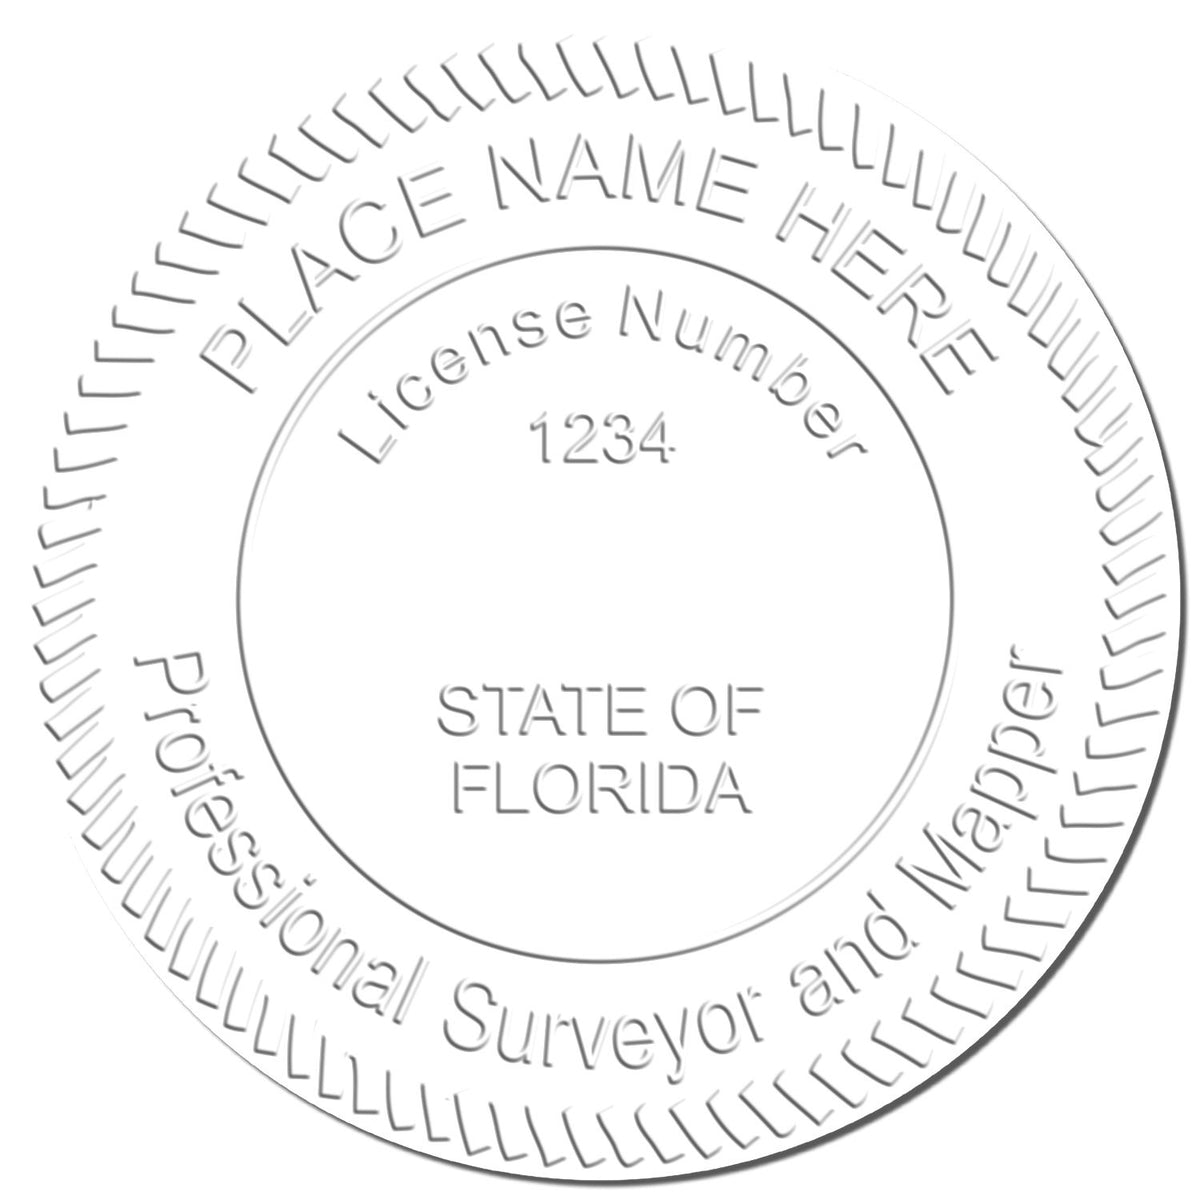 This paper is stamped with a sample imprint of the Florida Desk Surveyor Seal Embosser, signifying its quality and reliability.